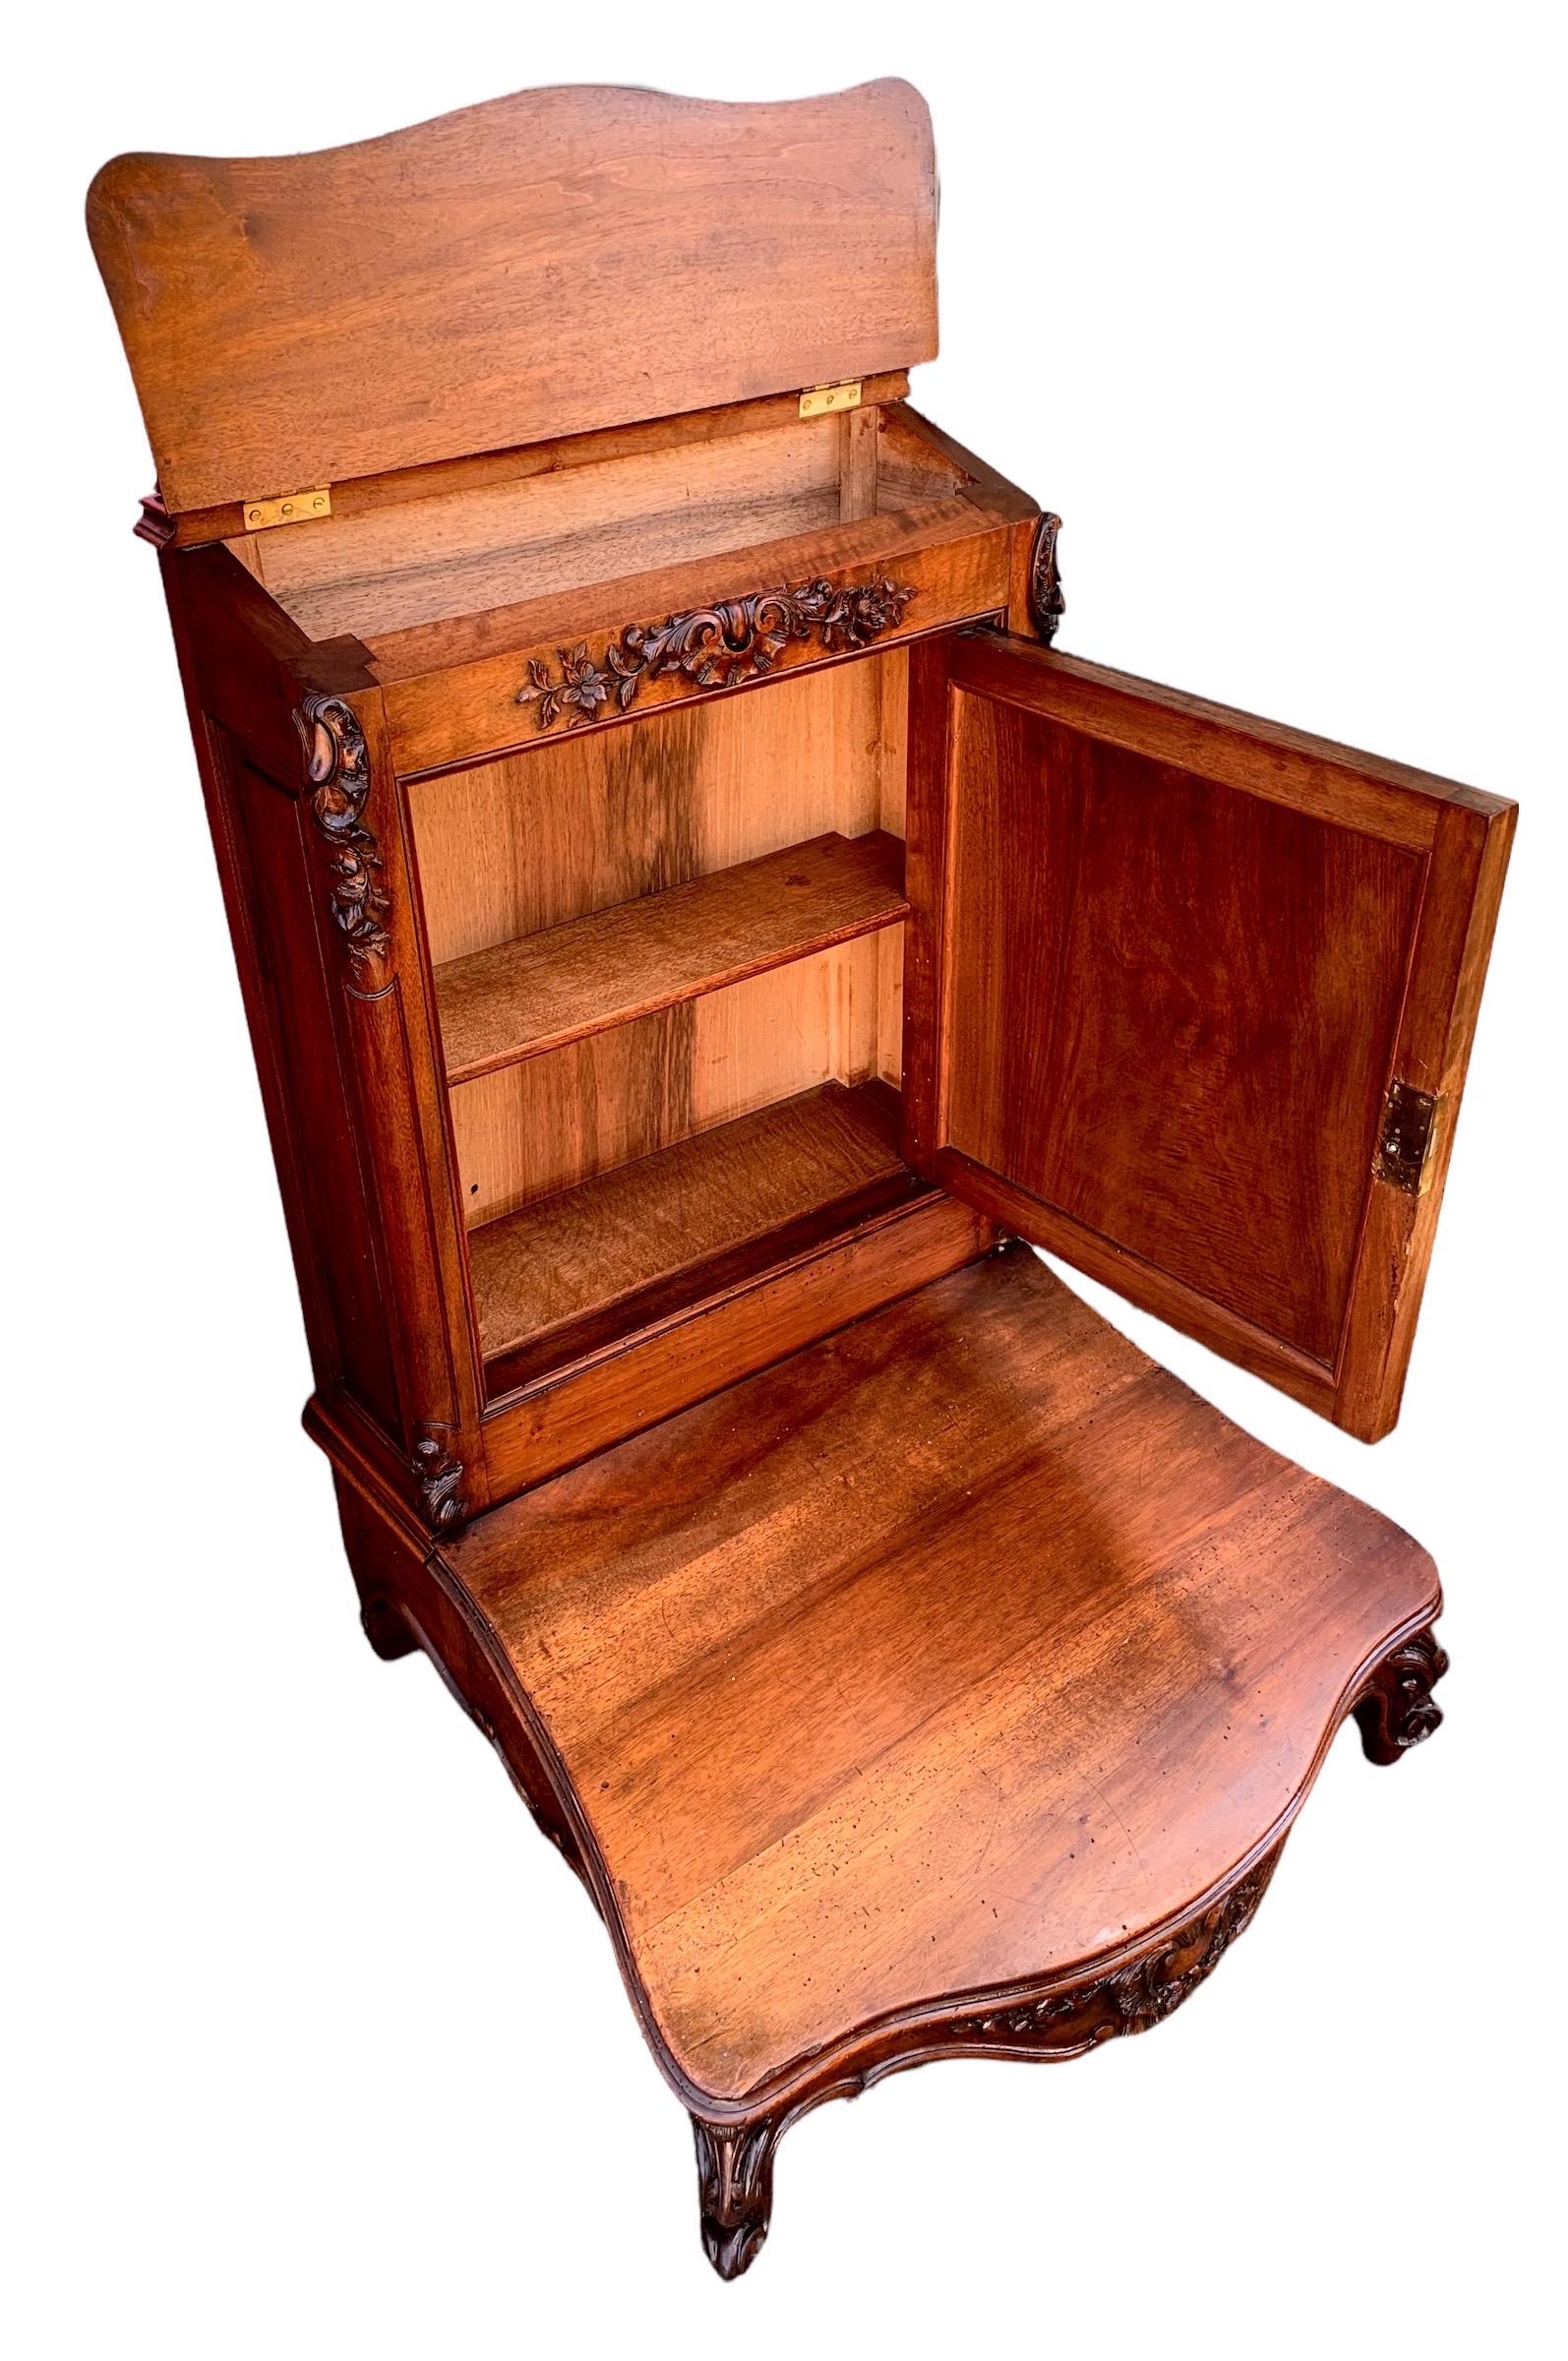 An stunning 19th century hand carved walnut Prie Dieu (Literally French for pray God) having a pierced cruciform crest over a slant top lifting arm rest opening to storage, over a relief and scroll carved cupboard door, above a wide kneeler, on